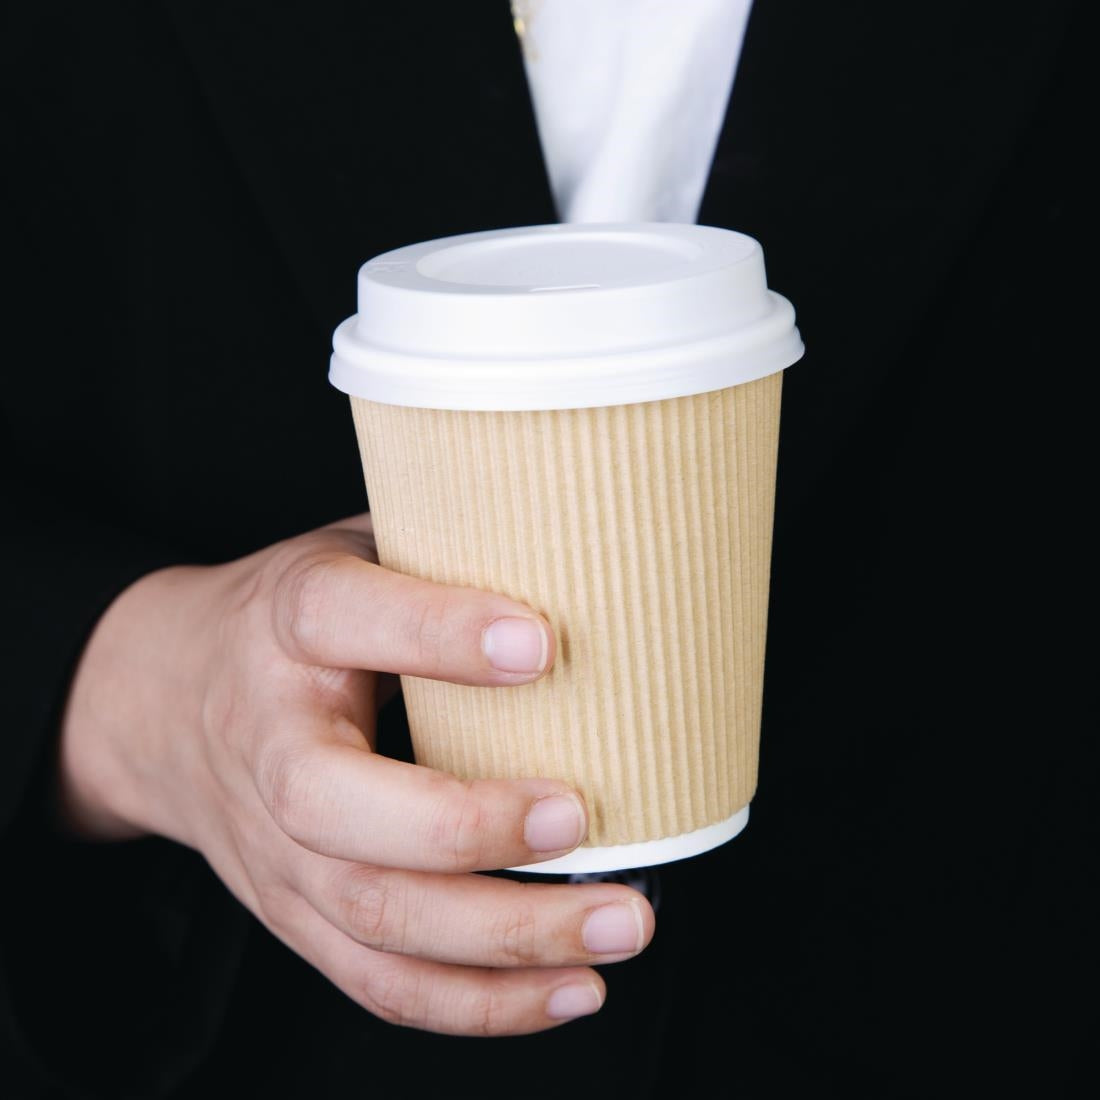 Fiesta Disposable Coffee Cup Lids White 225ml / 8oz JD Catering Equipment Solutions Ltd